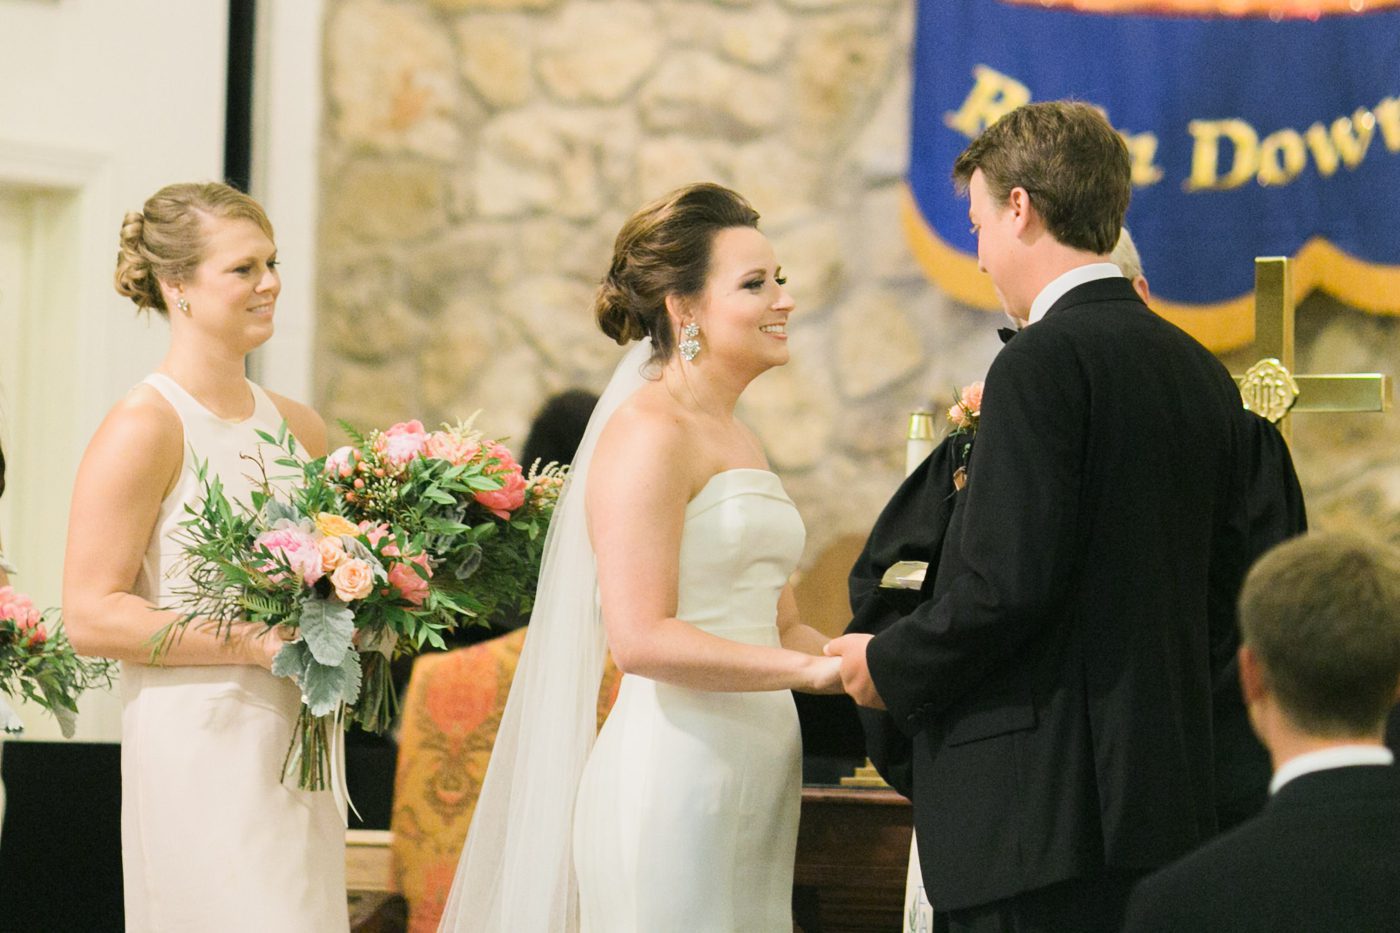 Wedding ceremony in a southern church. Photo by Charleston wedding photographer Catherine Ann Photography